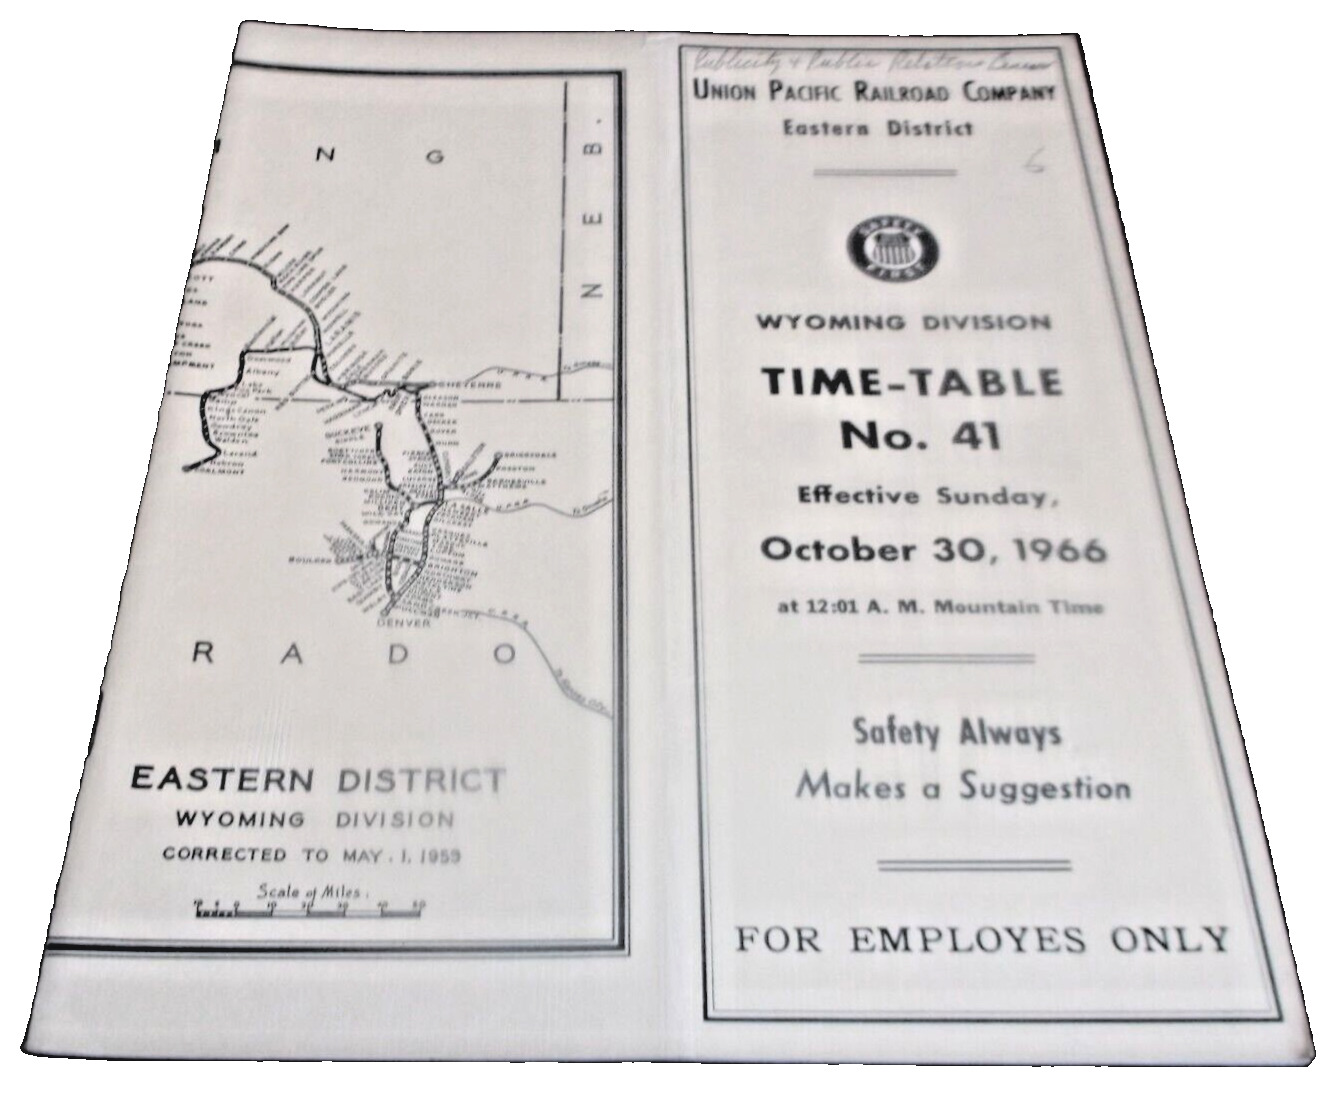 OCTOBER 1966 UNION PACIFIC WYOMING DIVISION EMPLOYEE TIMETABLE #41